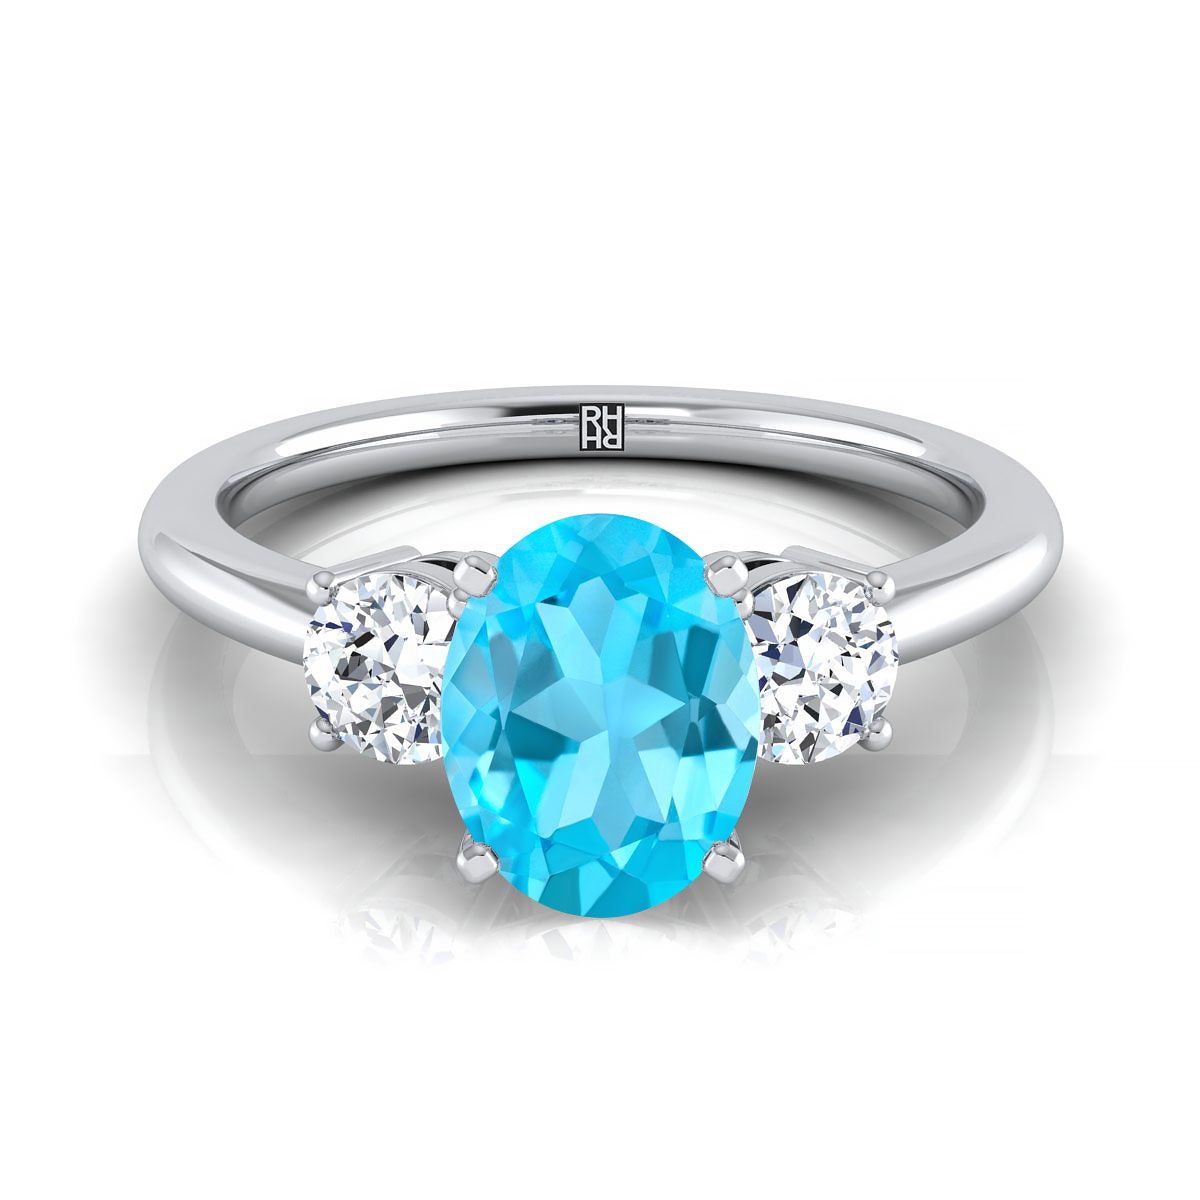 14K White Gold Oval Swiss Blue Topaz Perfectly Matched Round Three Stone Diamond Engagement Ring -1/4ctw